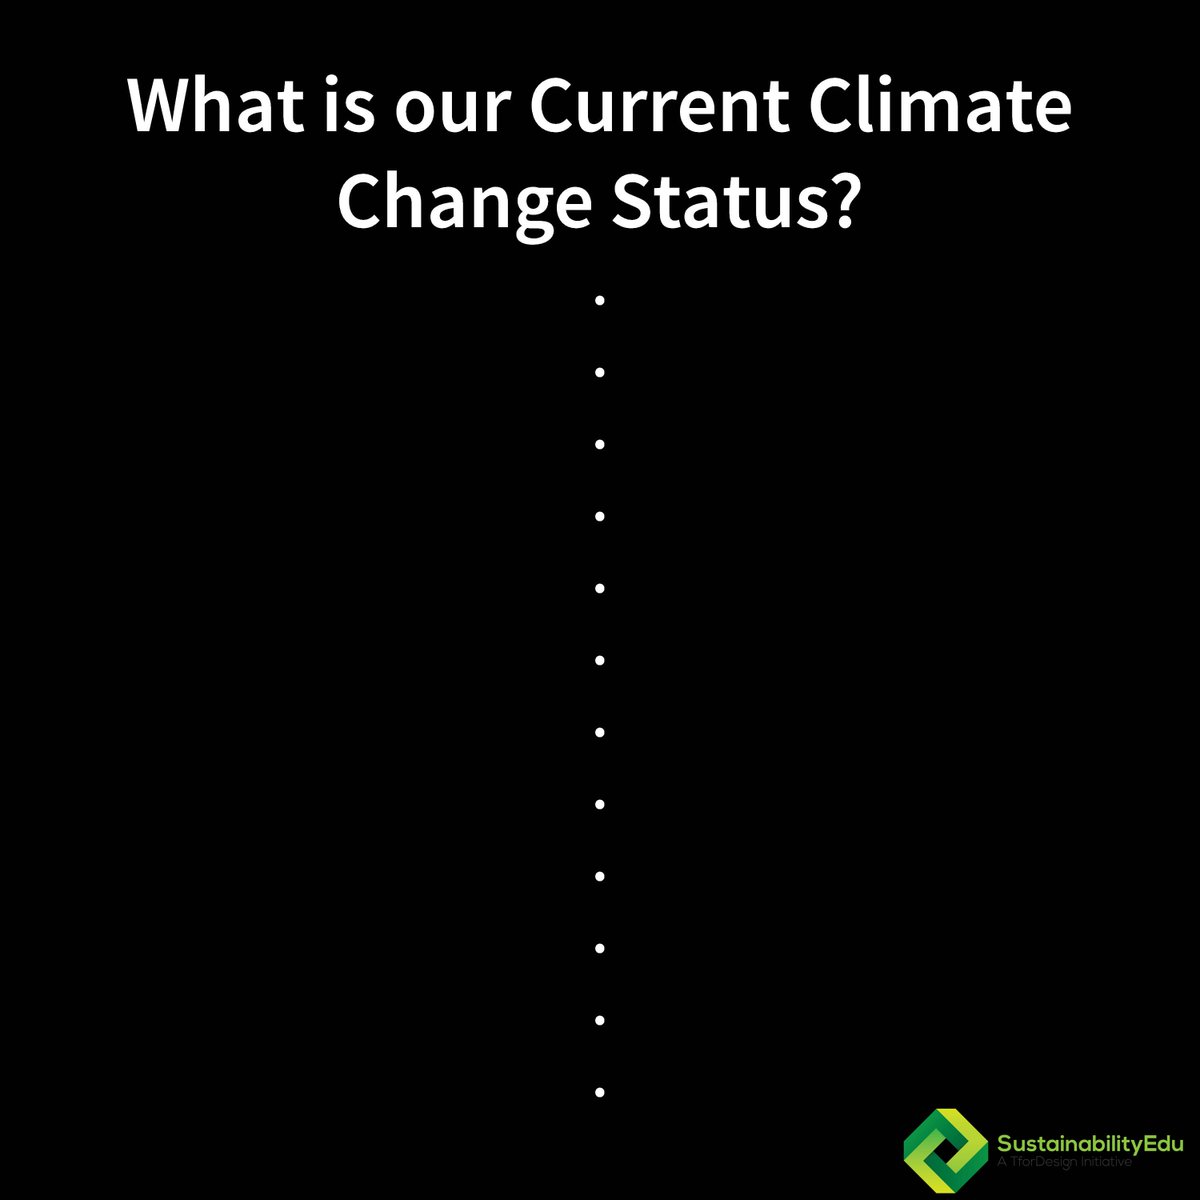 What's our current status with #ClimateChange? #follow #SustainabilityEdu #Instagram 4 more instagram.com/sustainability…